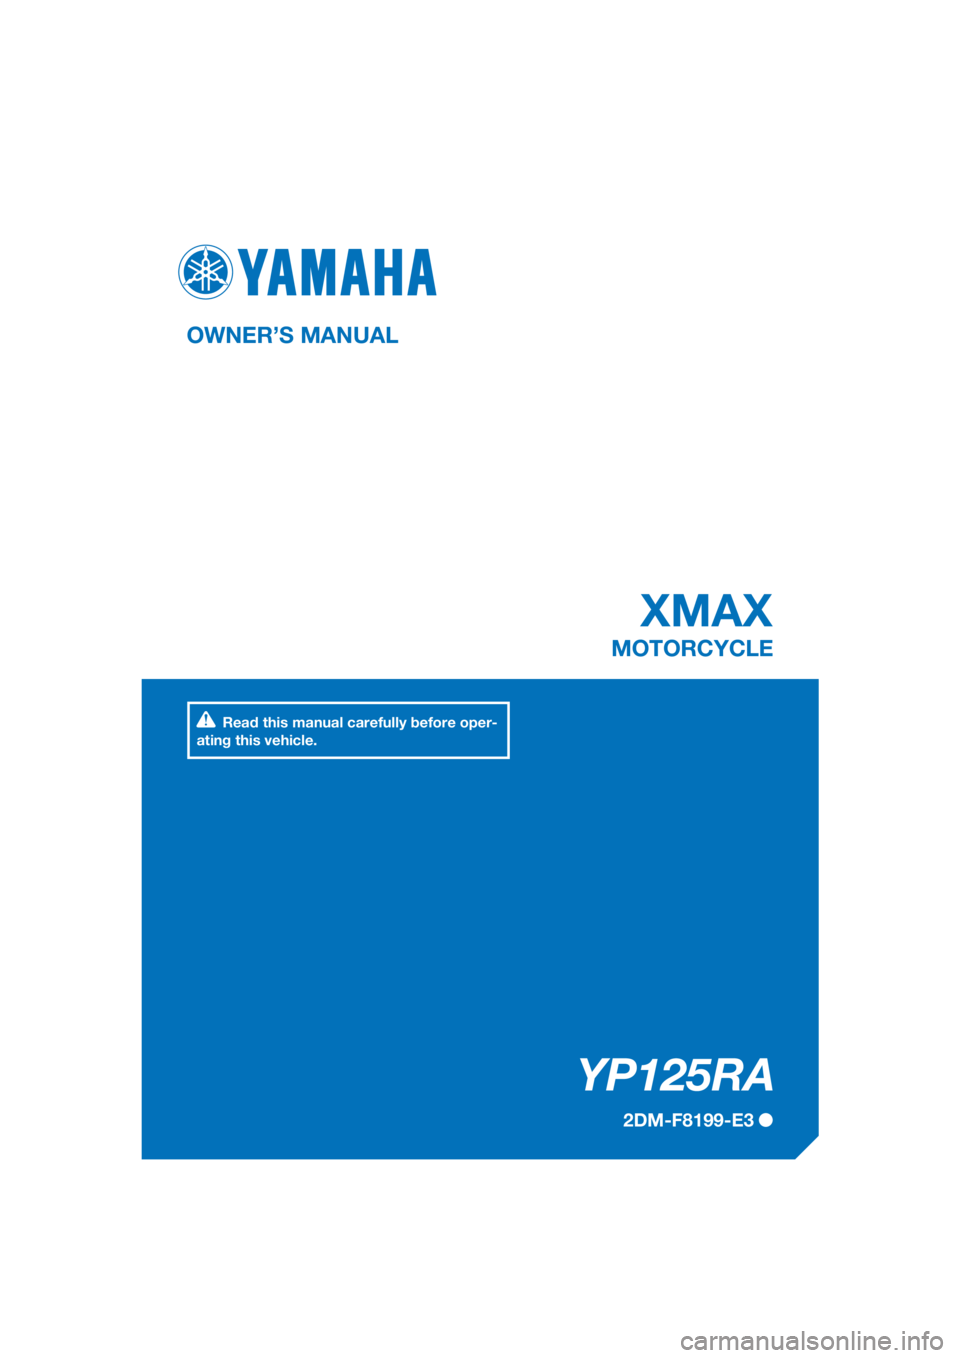 YAMAHA XMAX 125 2017  Owners Manual PANTONE285C
YP125RA
XMAX
OWNER’S MANUAL
2DM-F8199-E3
MOTORCYCLE
[English  (E)]
Read this manual carefully before oper-
ating this vehicle. 